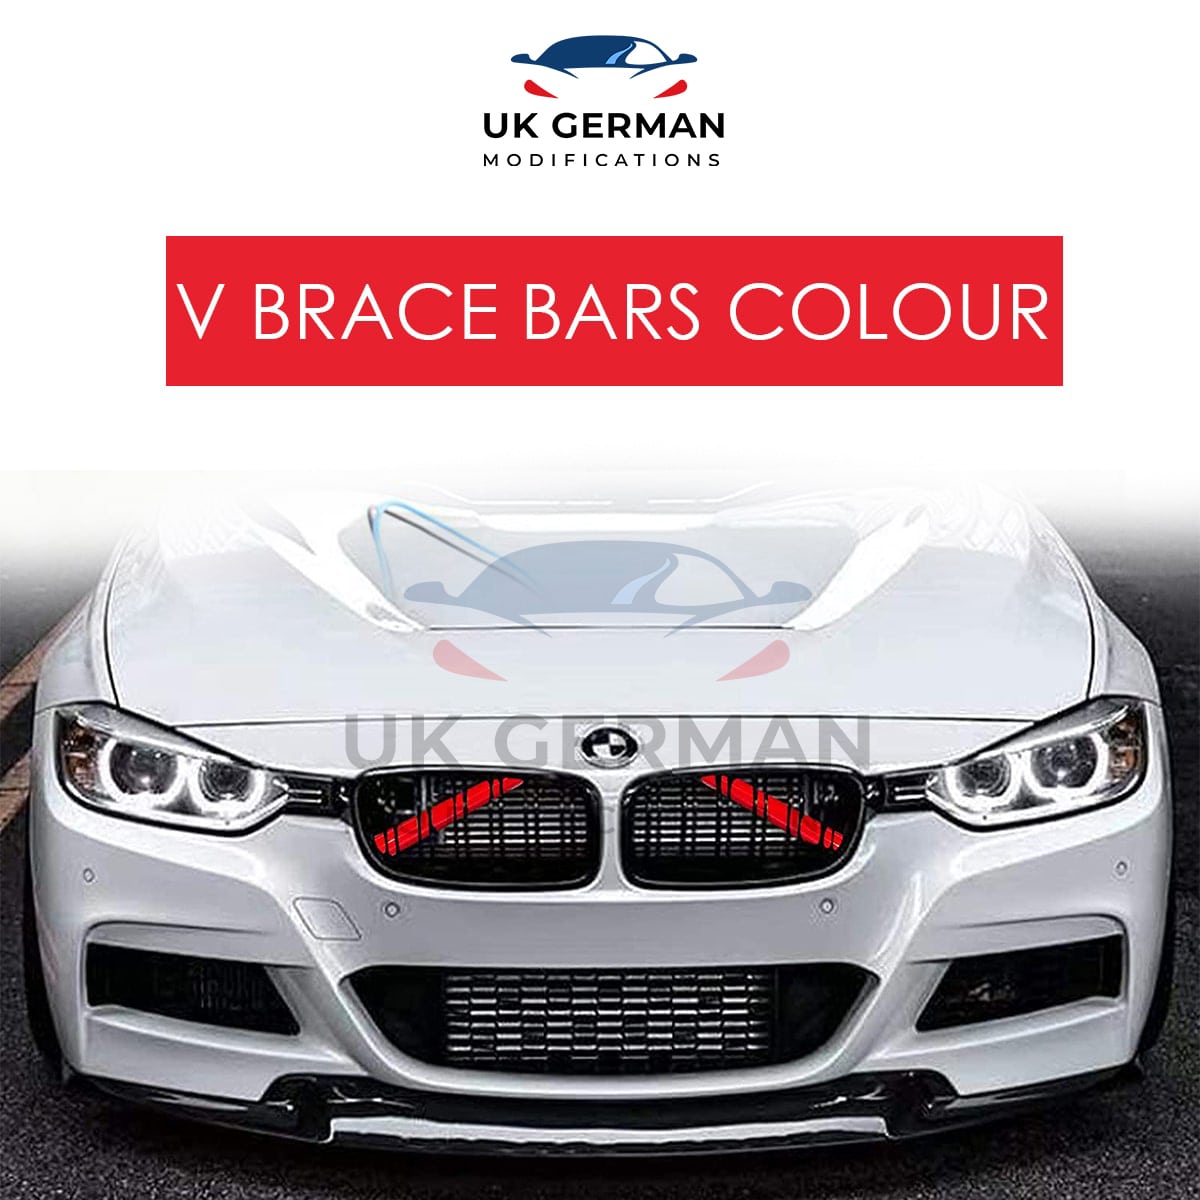 BMW Front Grill Color Wrap For Vbrace Bars » UK GERMAN MODIFICATIONS LIMITED